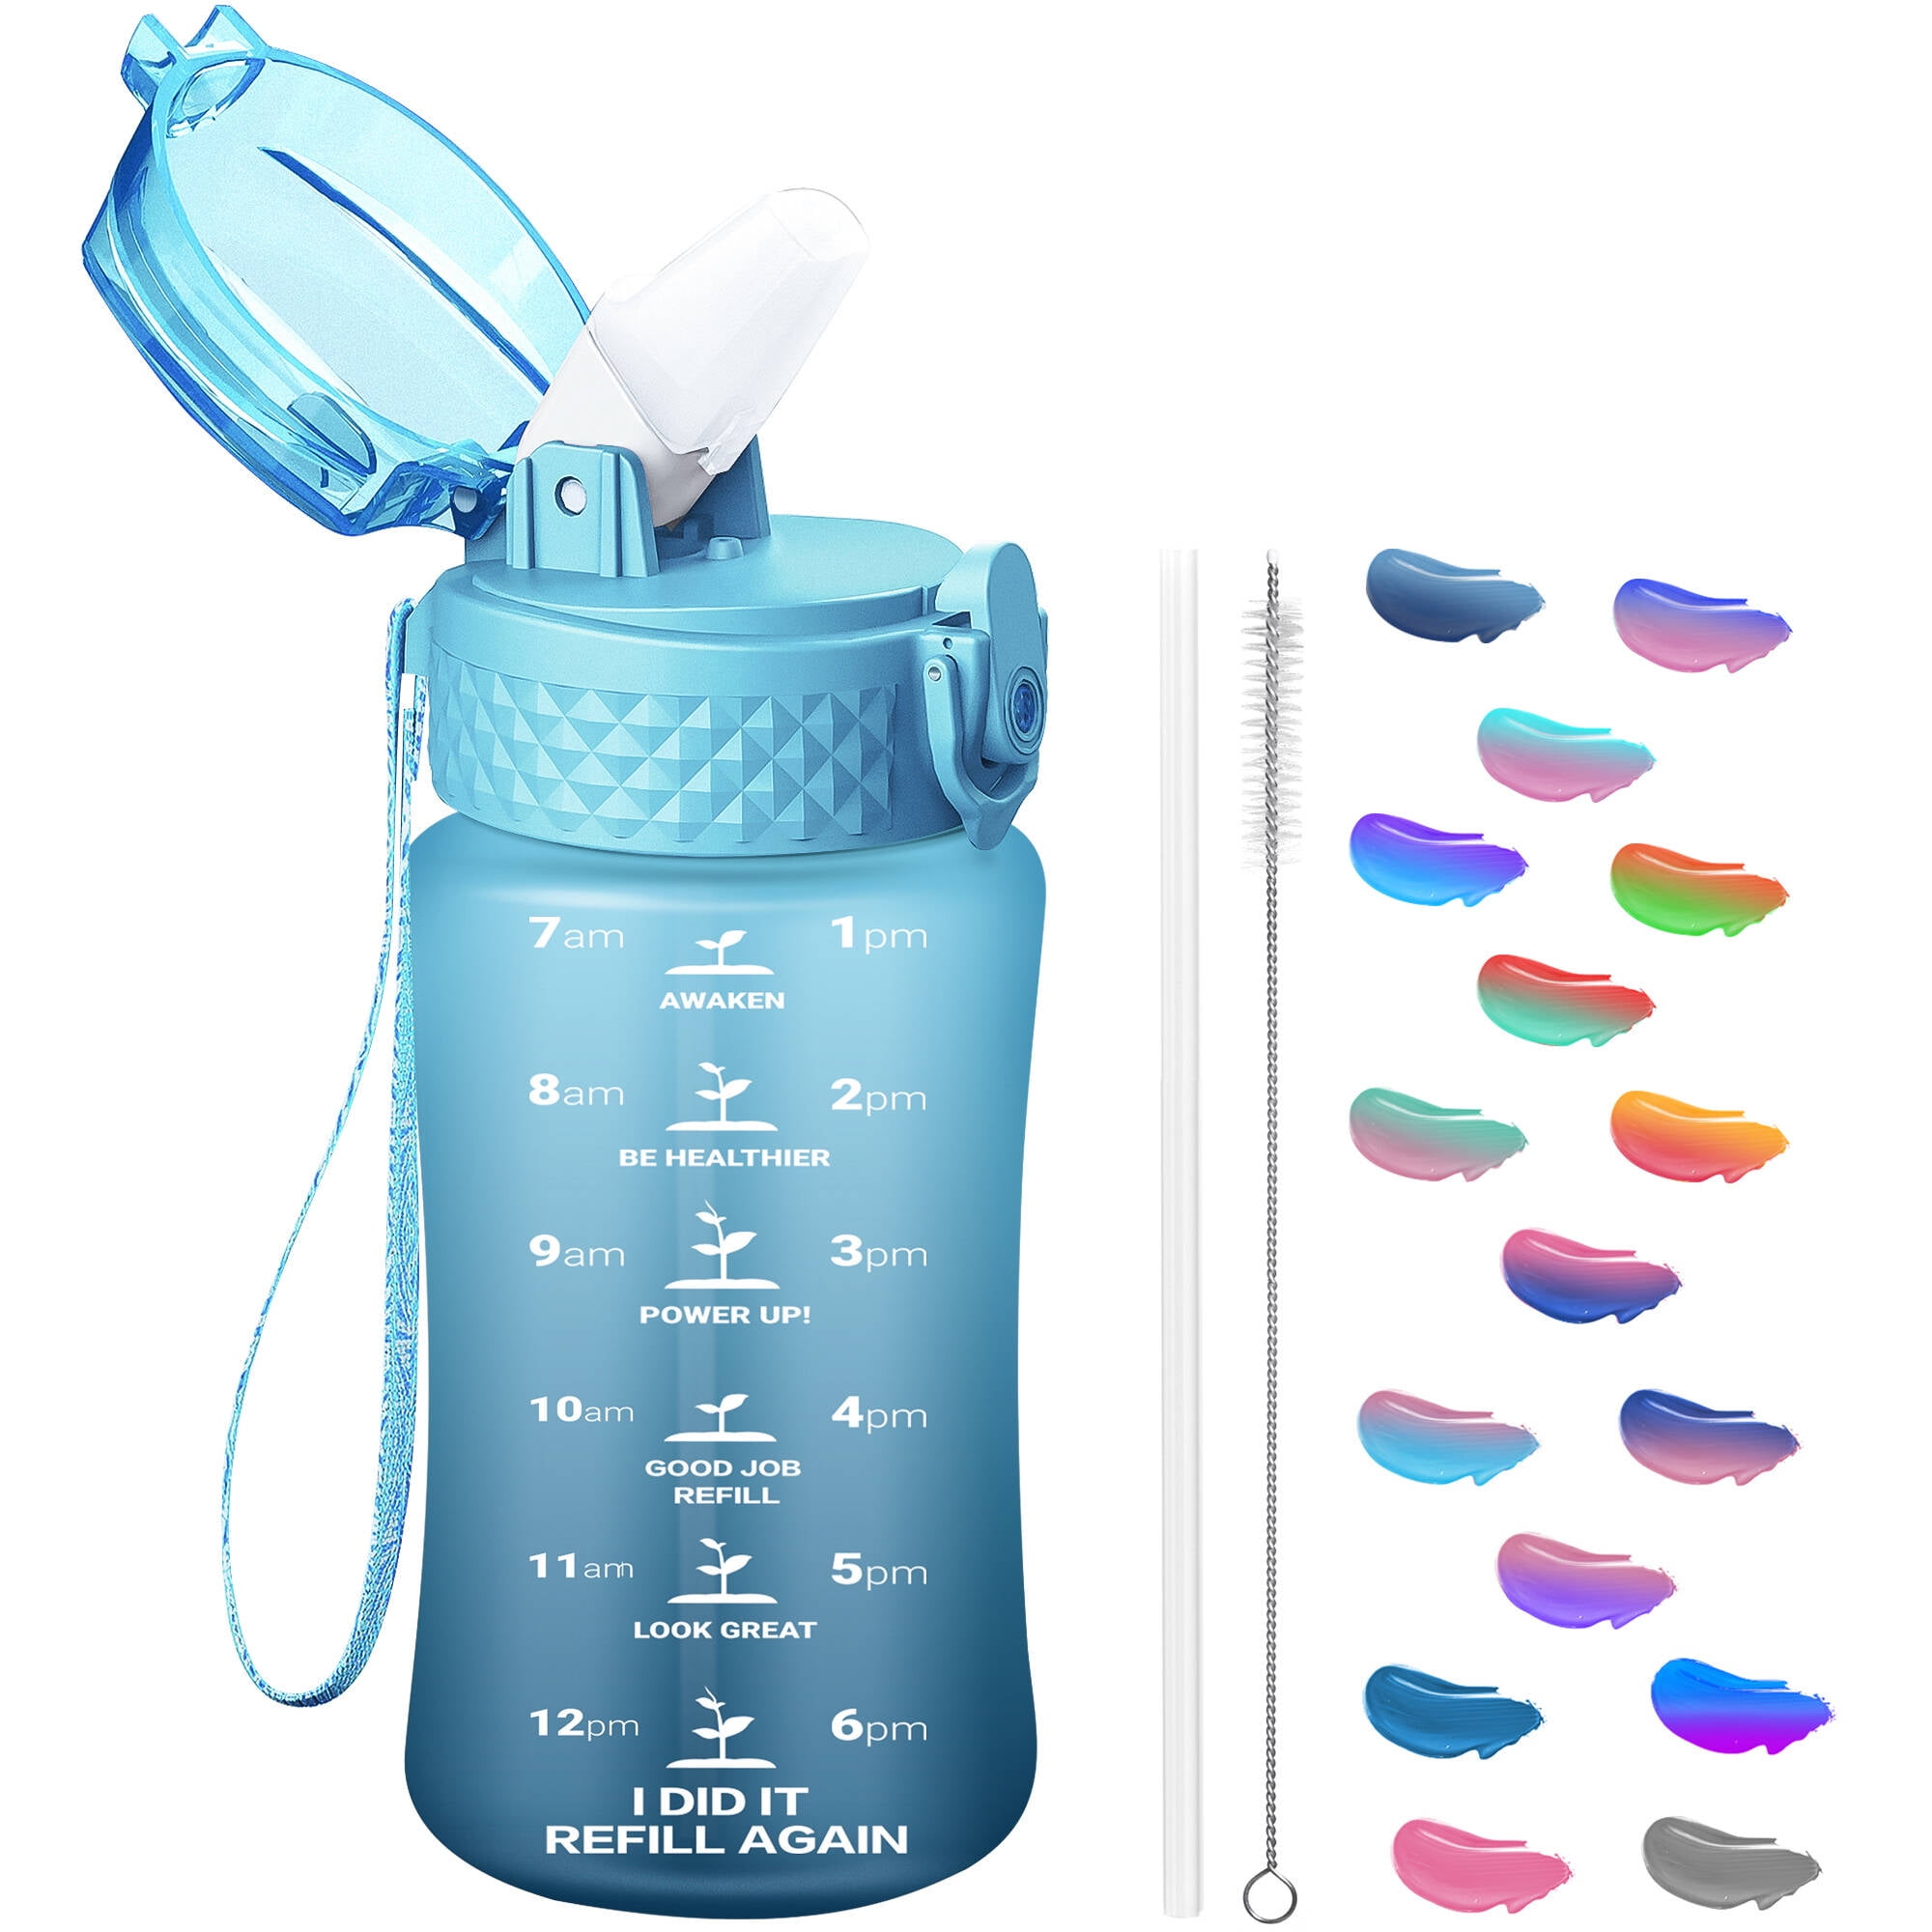 Simple Modern Water Bottle with Straw Lid & Ounce Markers 1 gal - GTM  Discount General Stores